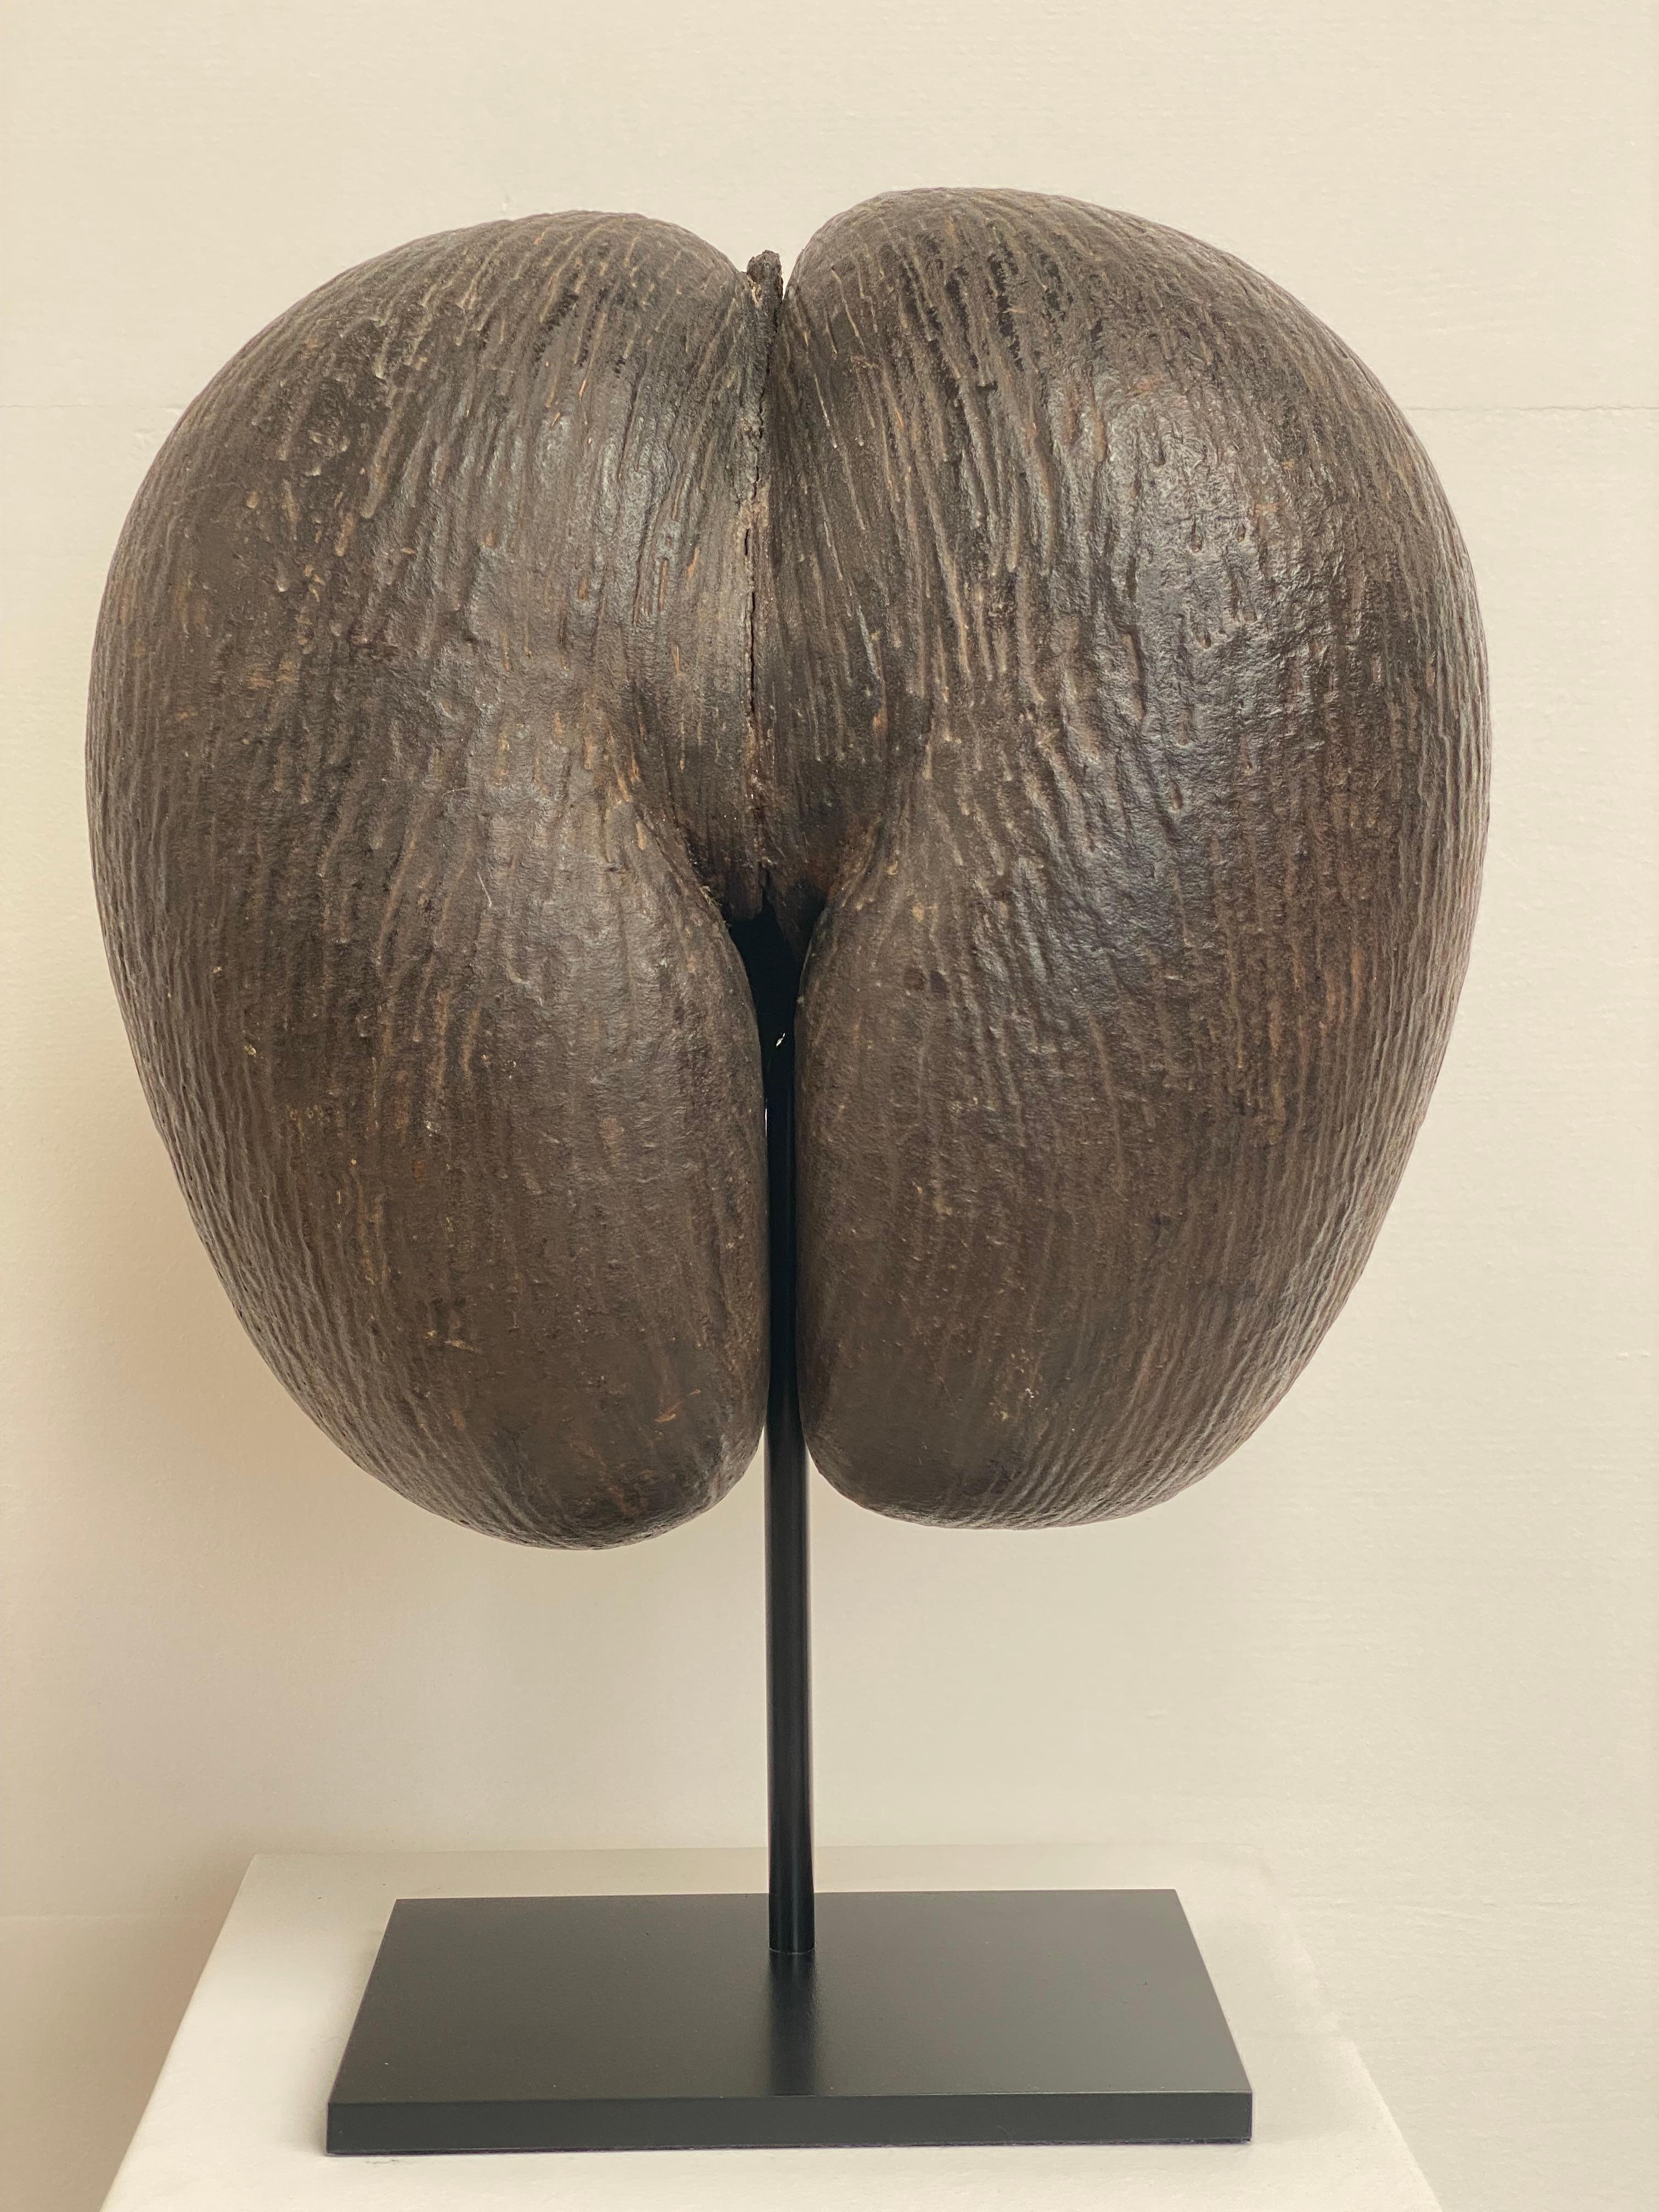 Exceptional Coco De Mer, Coco Fesse, Coco d'Amour,
in its original State from the African Archipel Seychelles,
good warm and original Color,
great patina and symmetric form of the Nut,
Iconic,quirky object great to put in your Cabinet de